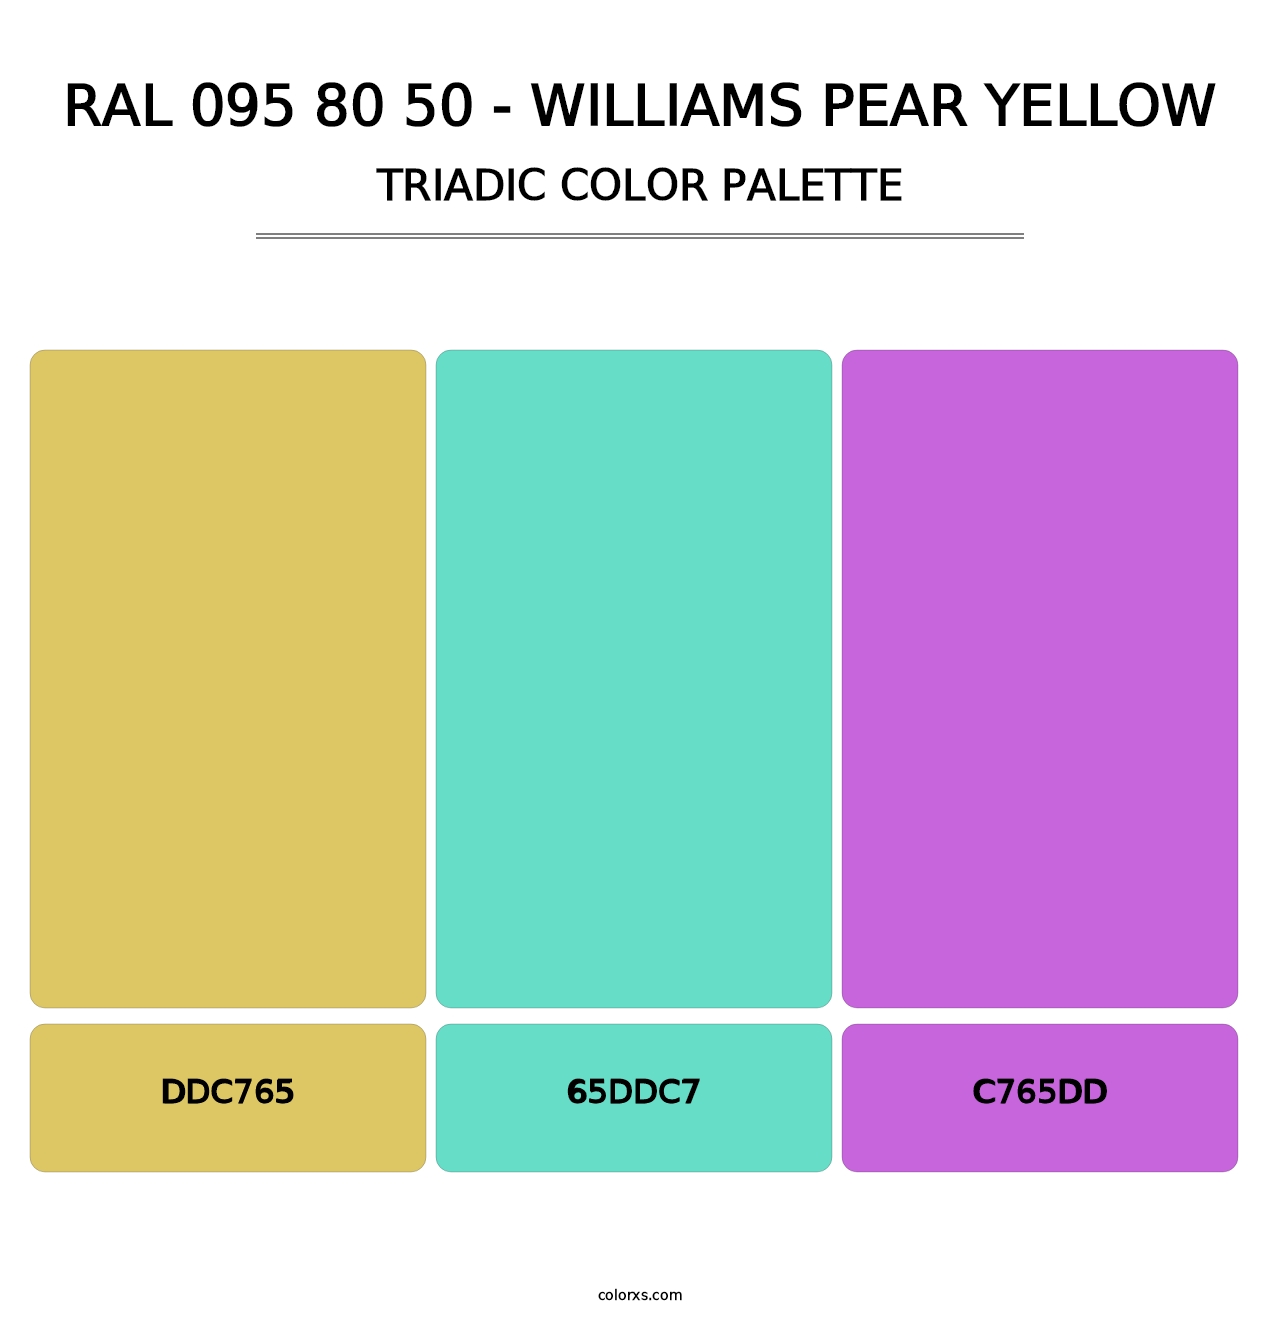 RAL 095 80 50 - Williams Pear Yellow - Triadic Color Palette